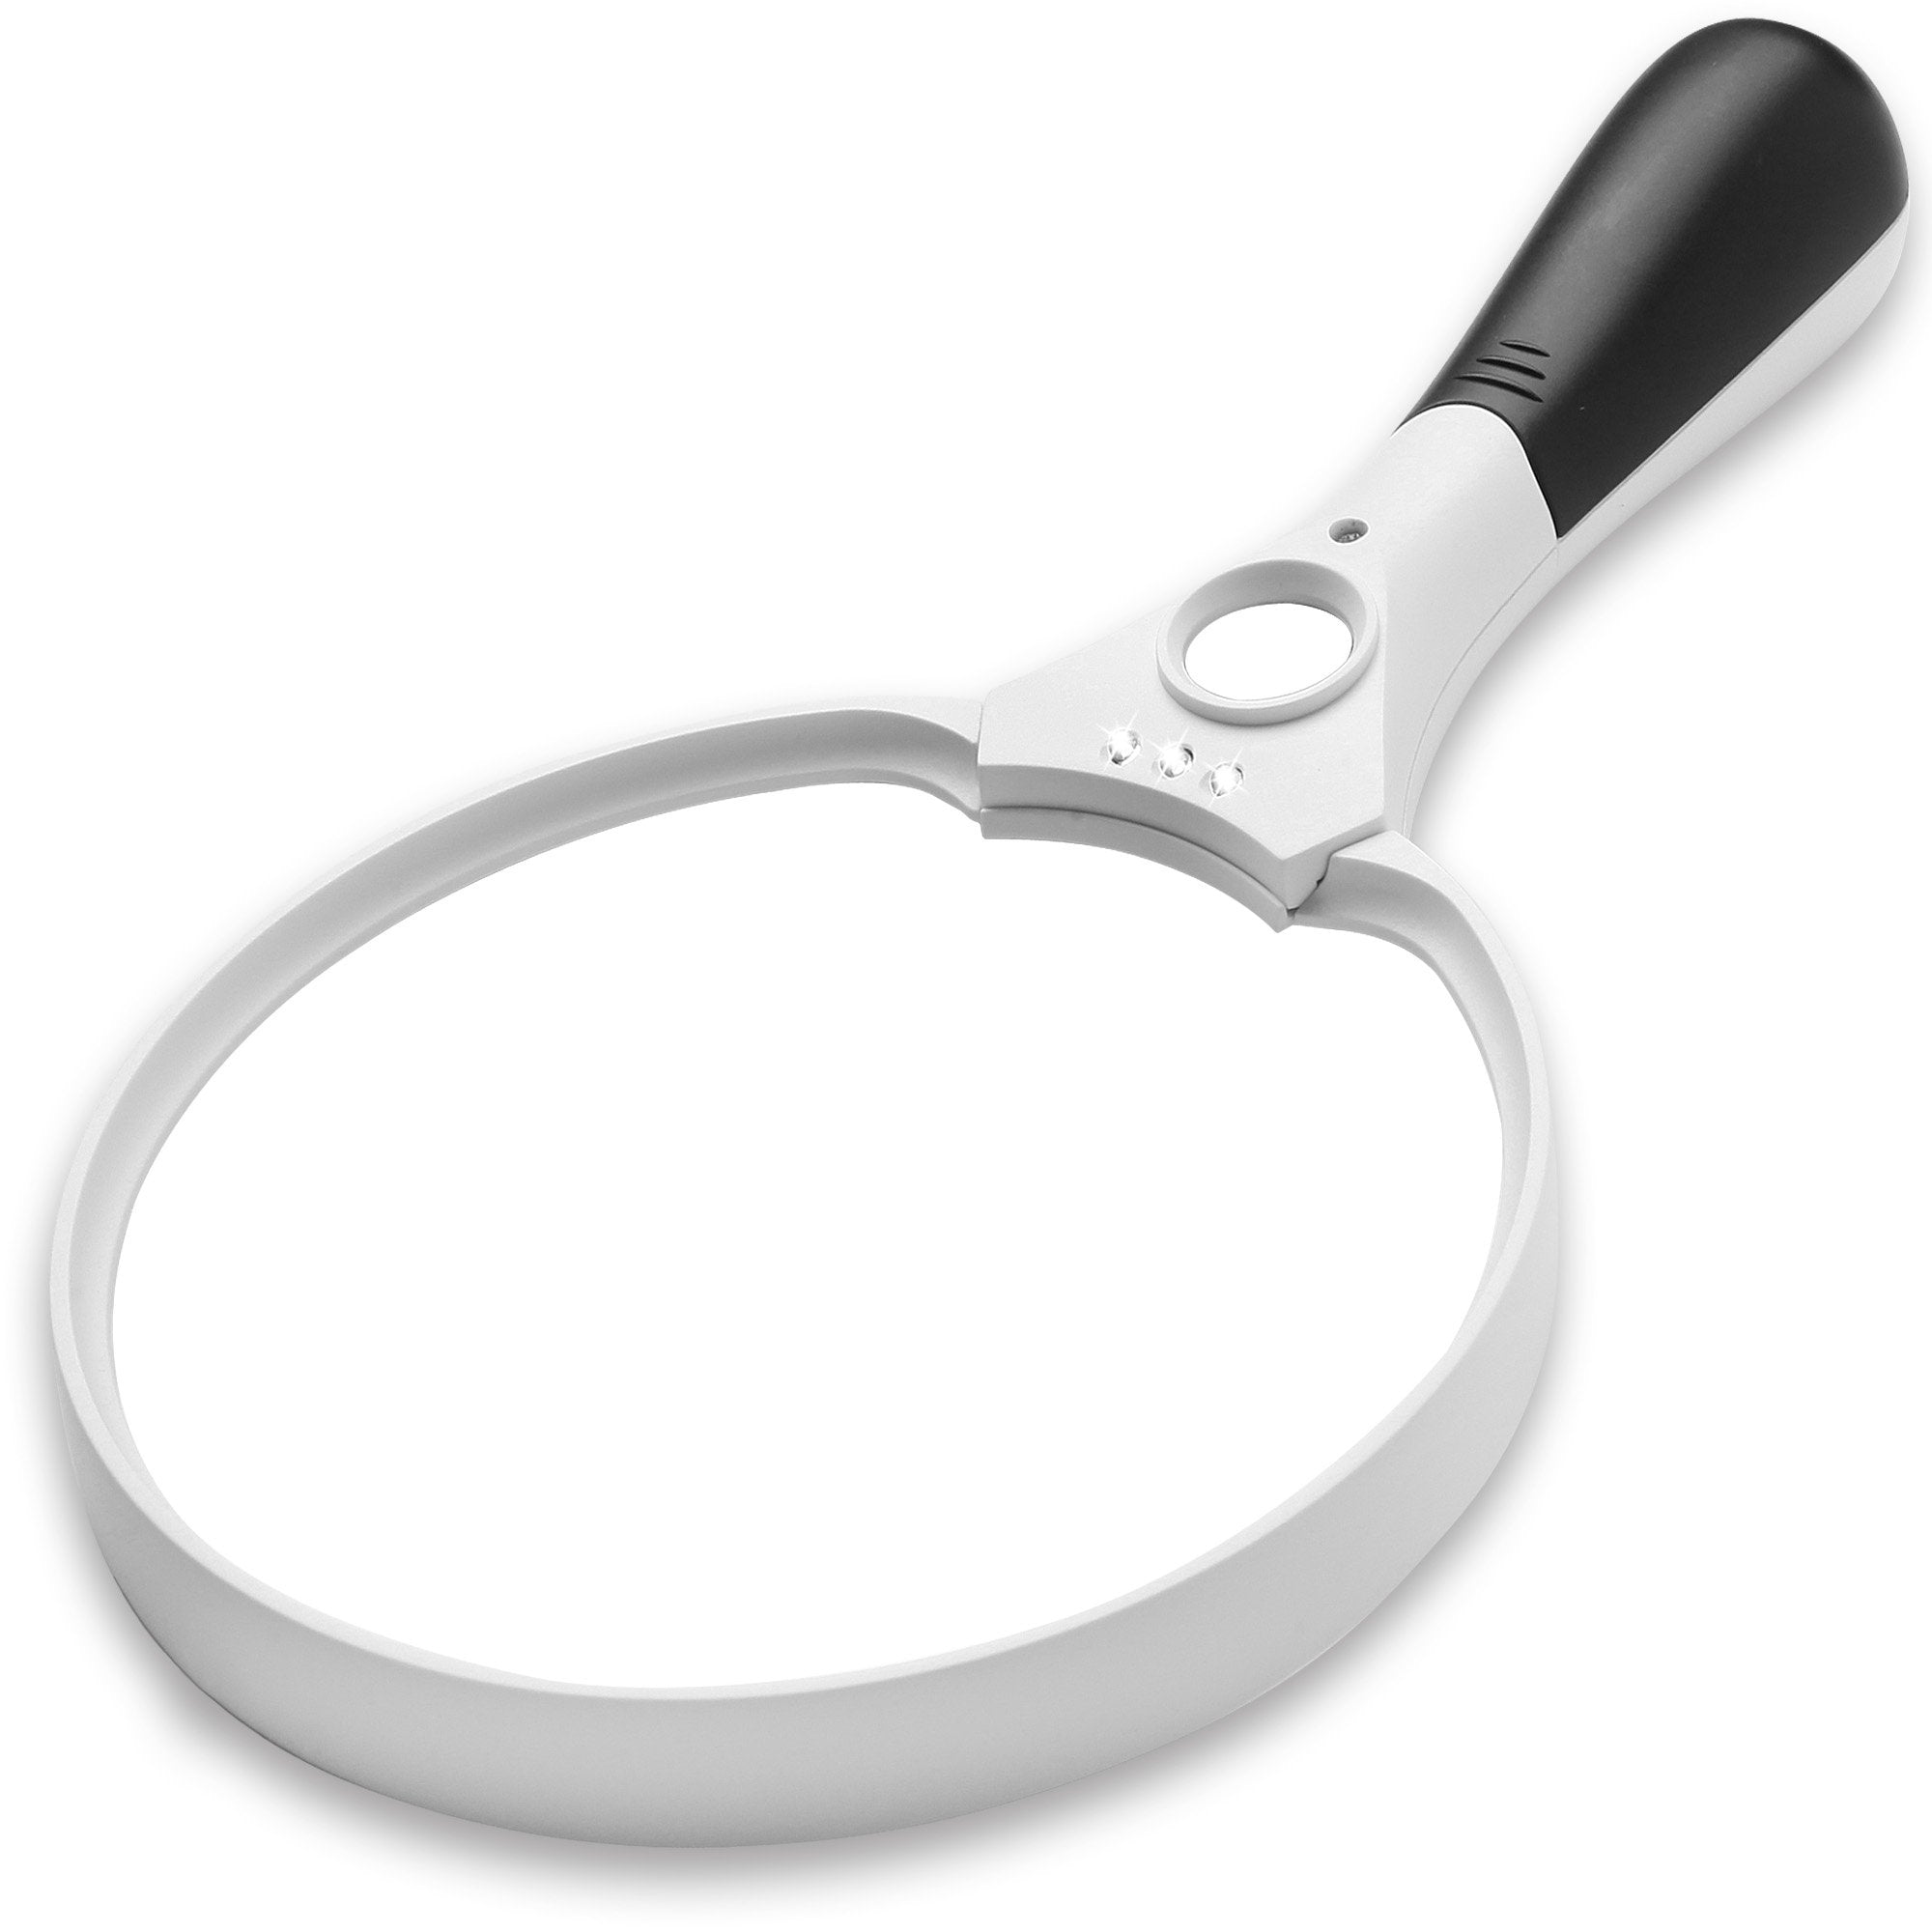 Fancii Extra Large LED Handheld Magnifying Glass with Light - 2X 4X 10X Lens - Best Jumbo Size Illuminated Reading Magnifier for Books, Newspapers, Maps, Coins, Jewellery, Hobbies & Crafts